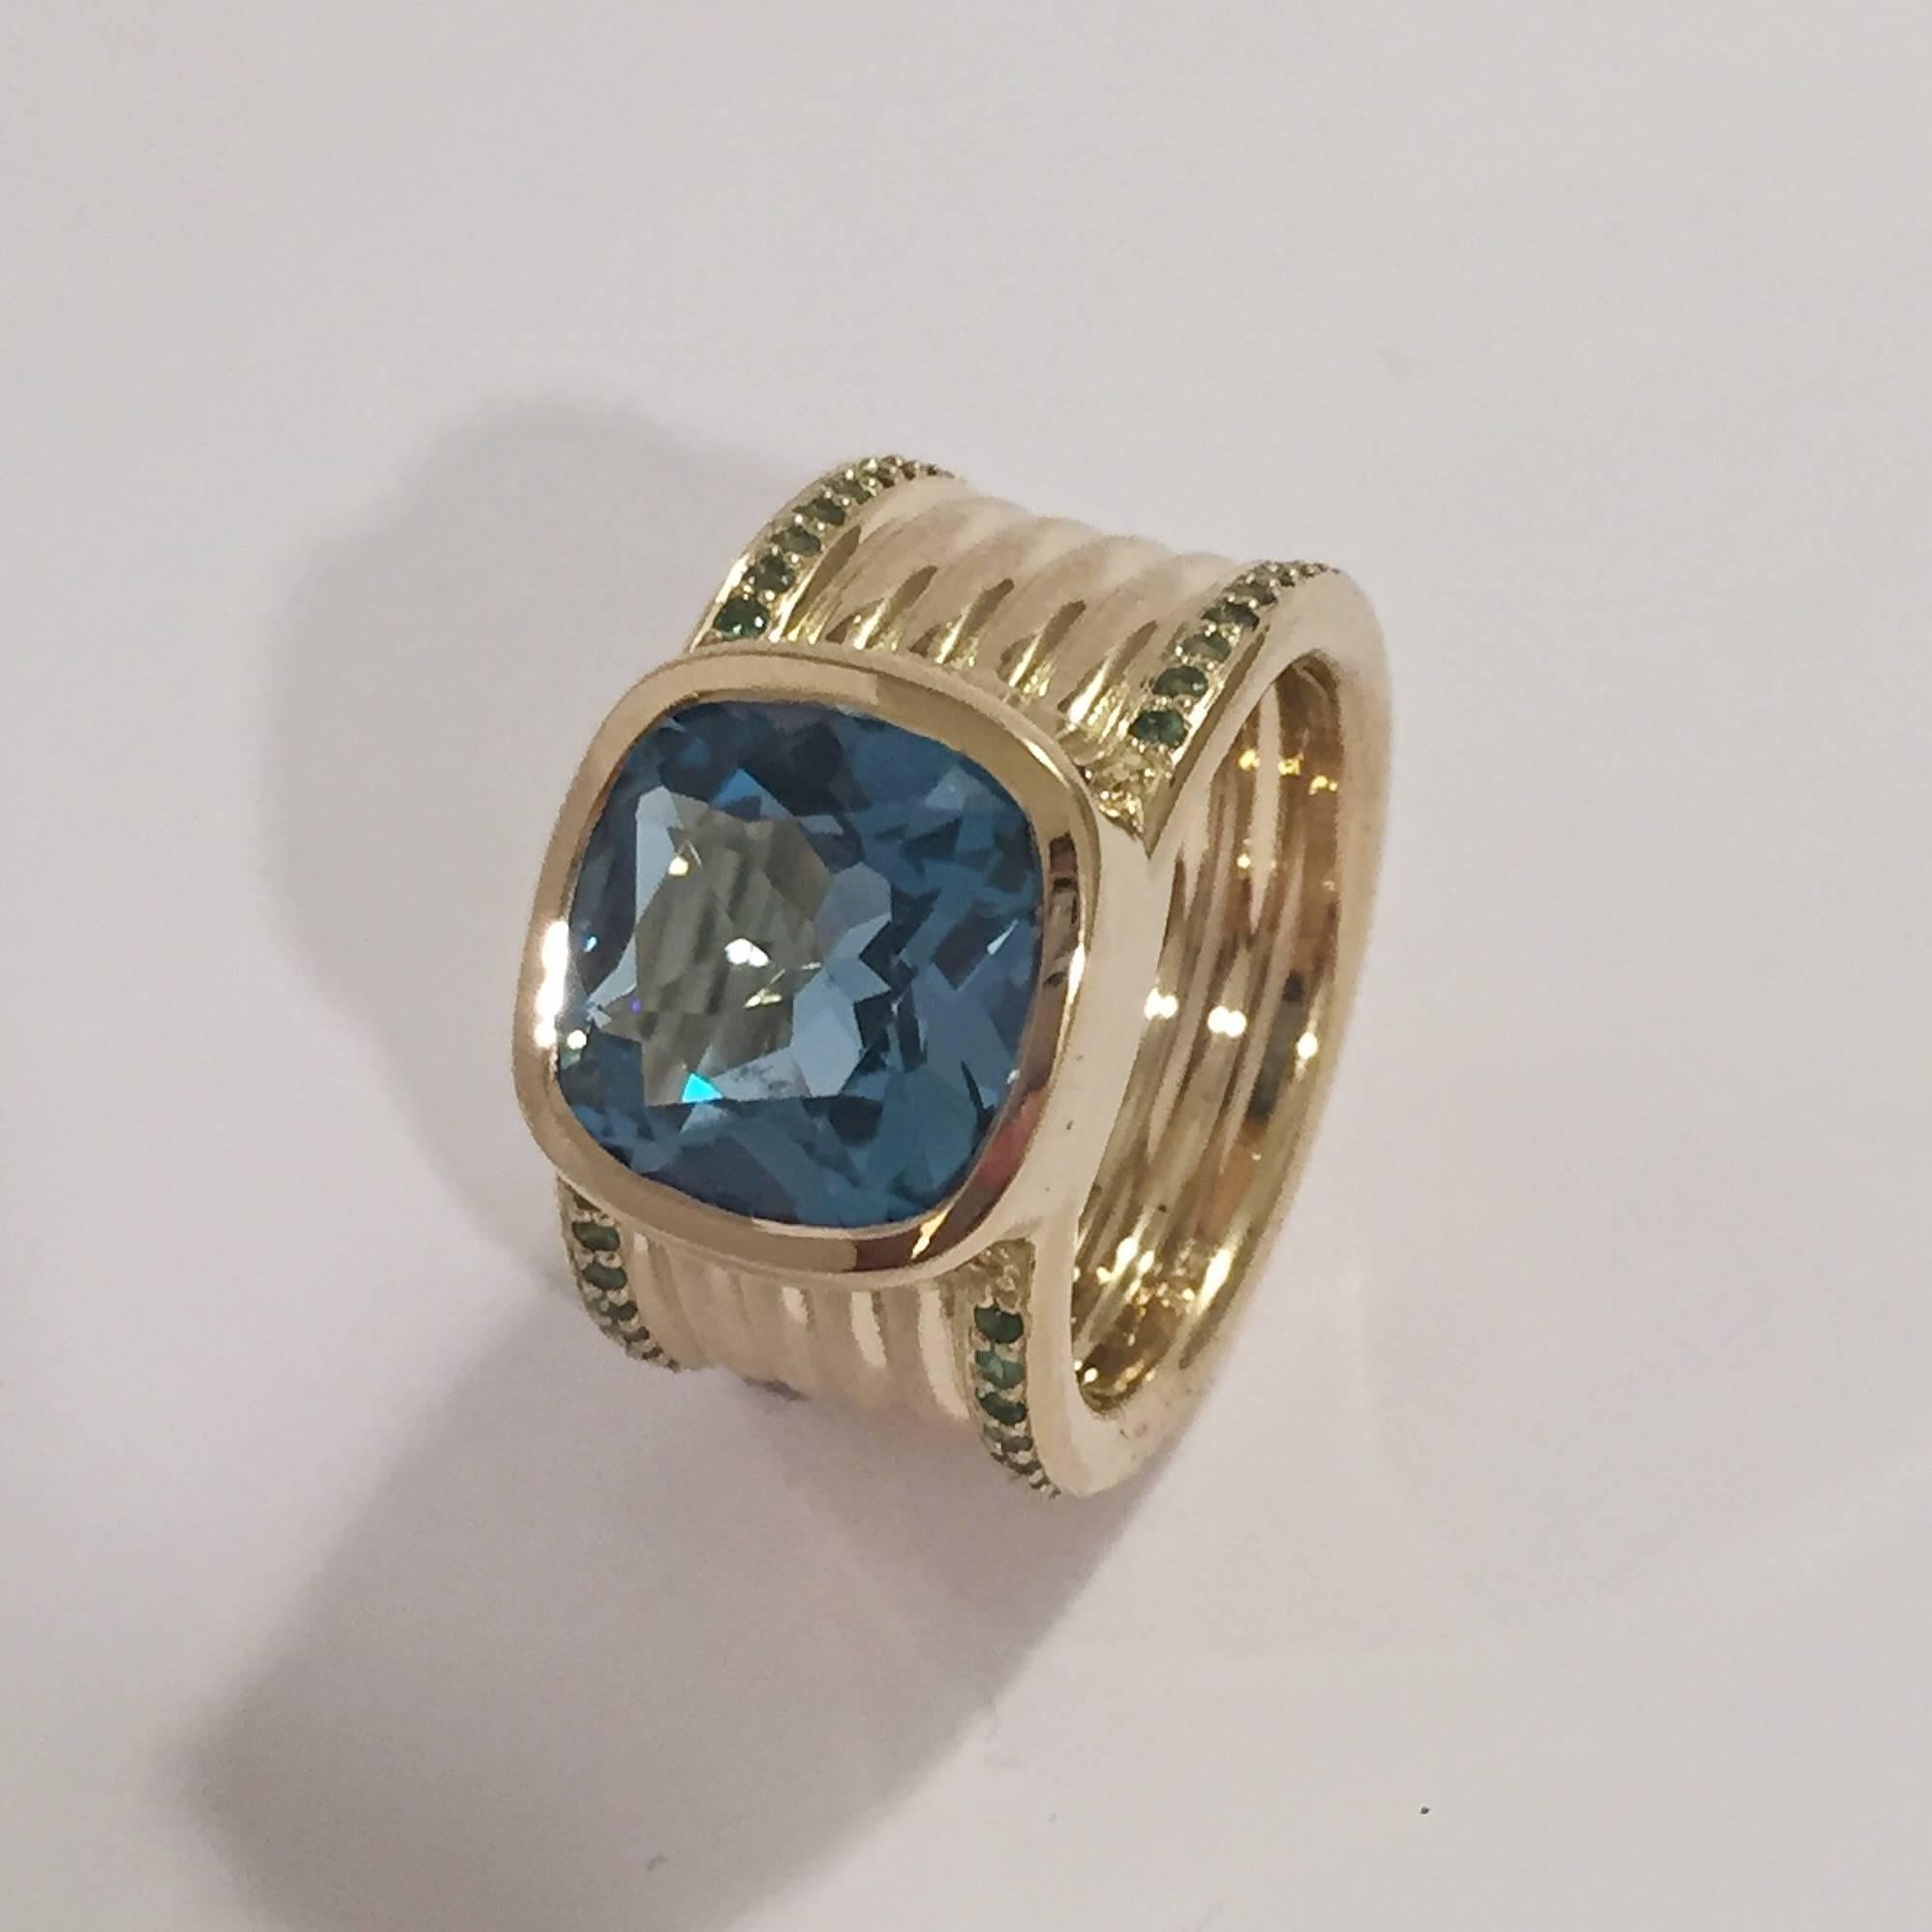 18kt Yellow Gold Cigar band ring with center faceted deep Blue Topaz and Tsavorite Green Garnet accents on the outer rims.

The Wide band ring is fluted with four ribbed bands down the middle of the ring.
The band is 1/2" wide.

The ring